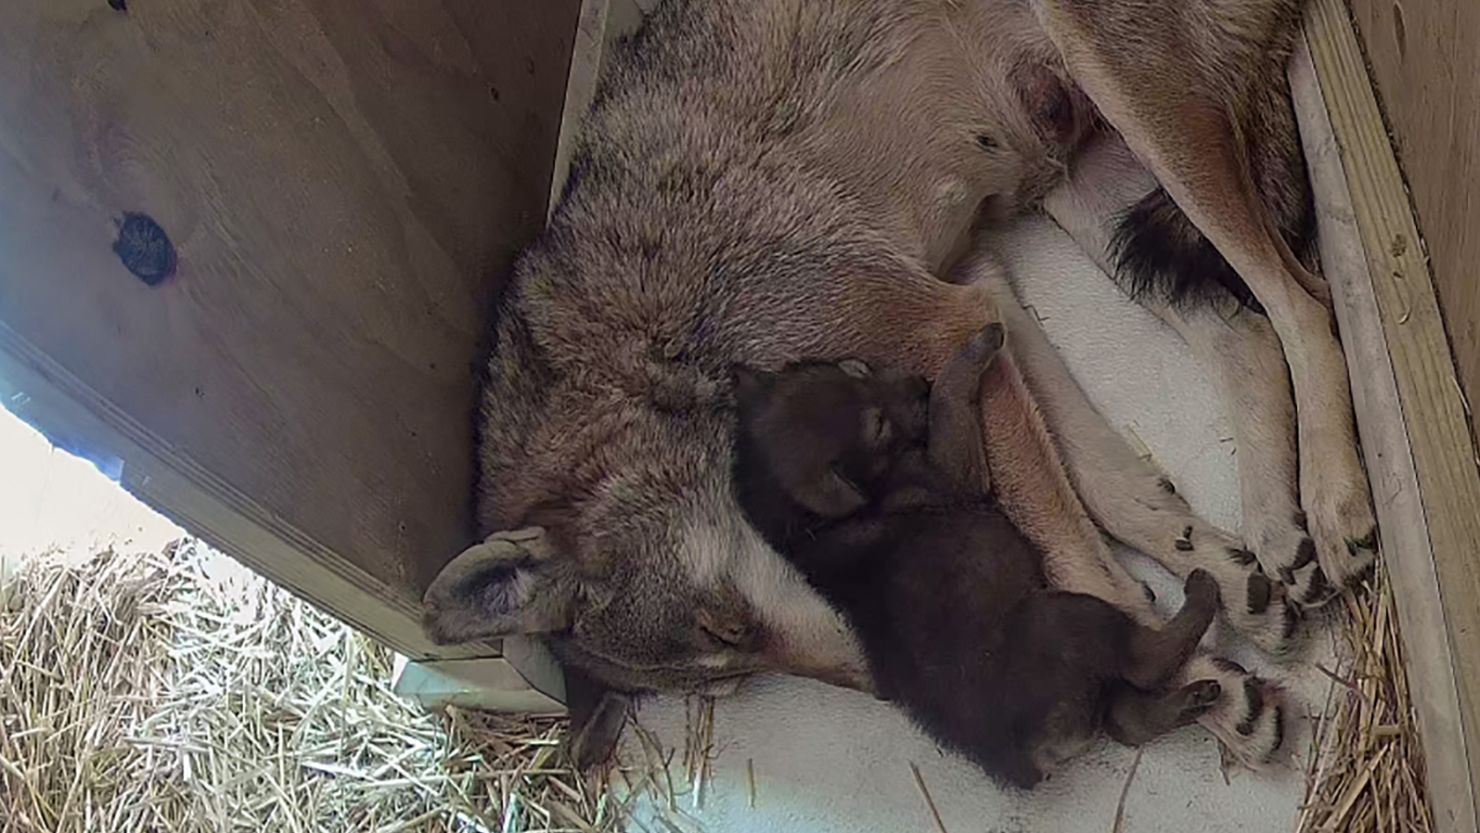 First-time mother, Brave the red wolf, tends to her newborn pup at the Roger Williams Park Zoo. The animals are the world's rarest wolf species, with only about 20 estimated to be left in the wild.